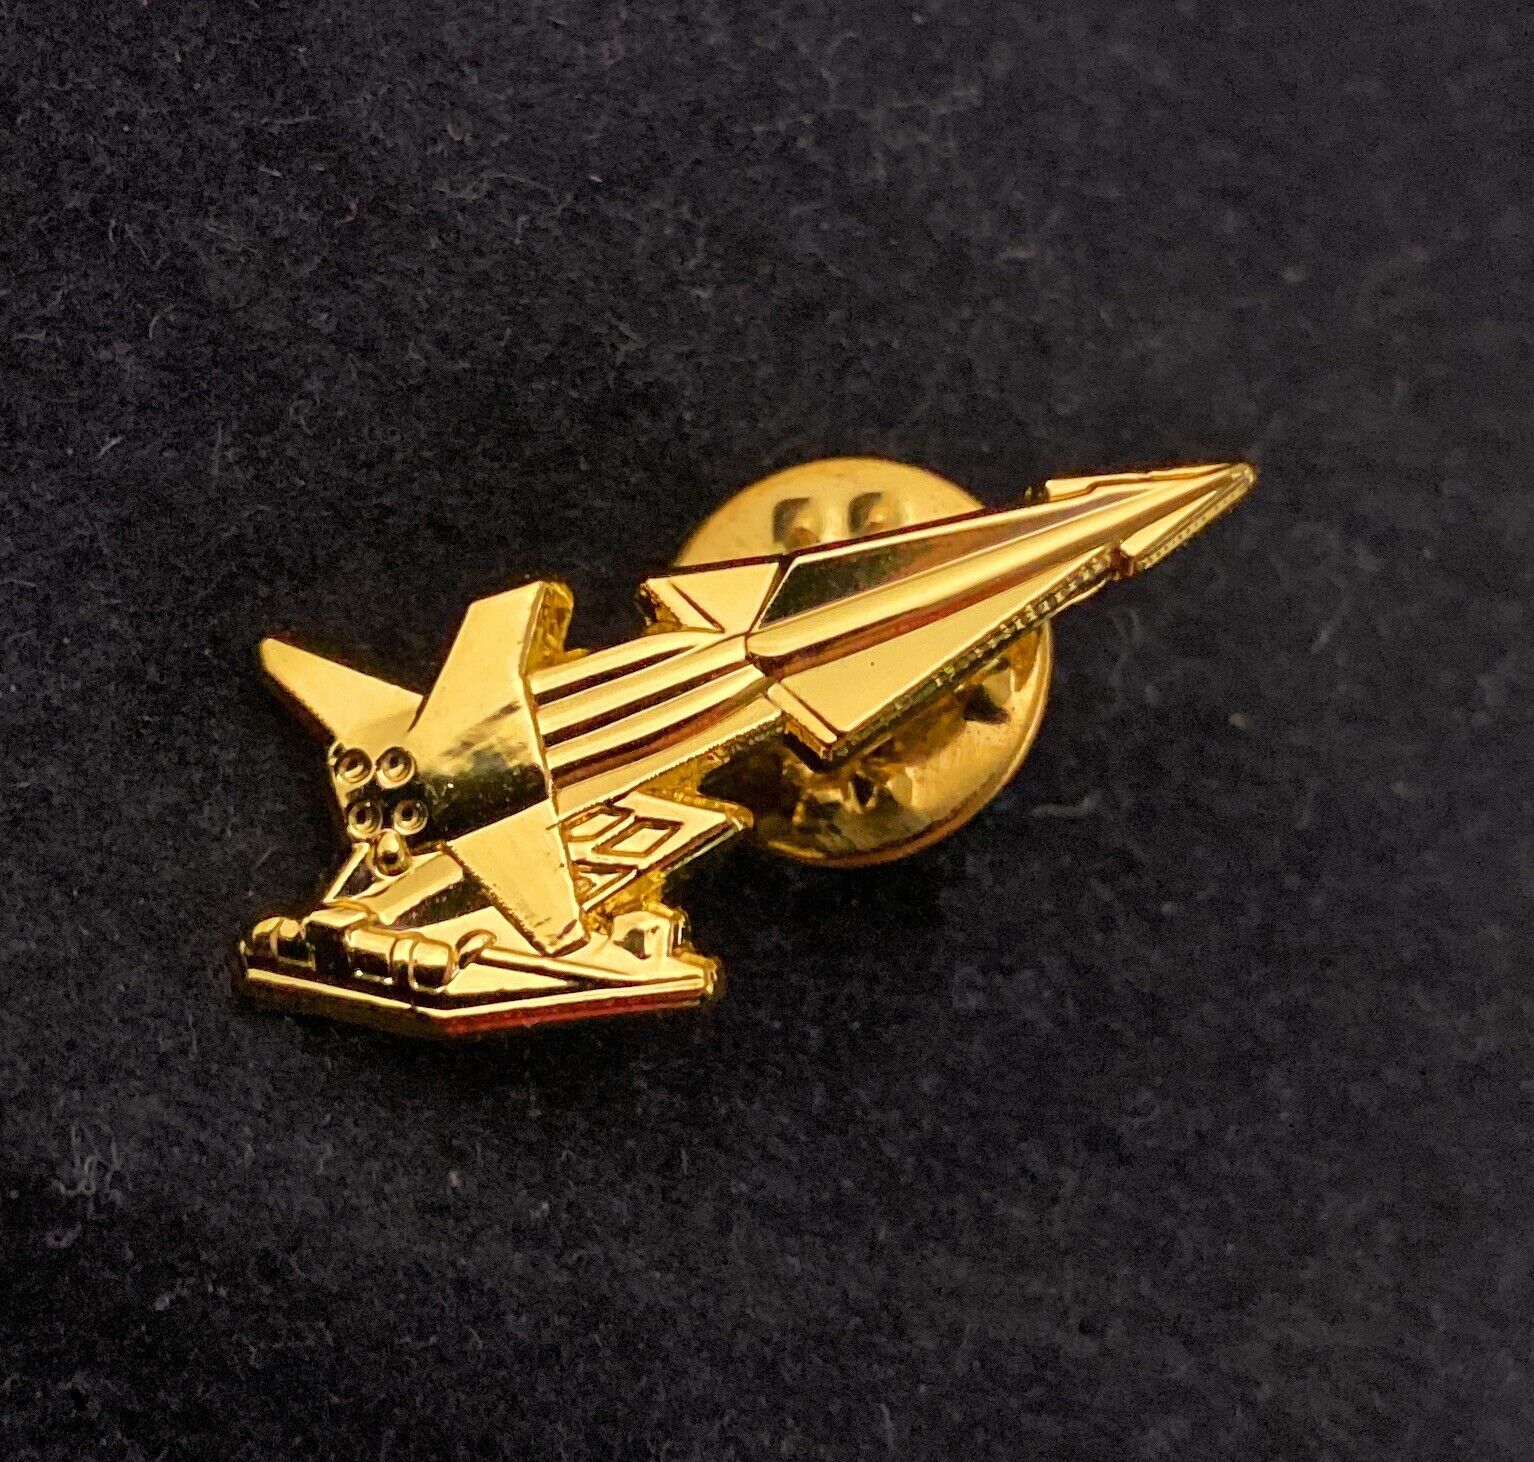 🌟Raytheon US Military MIM-14 Nike Hercules Missile, Gold Pin For Hat Tie Shirt